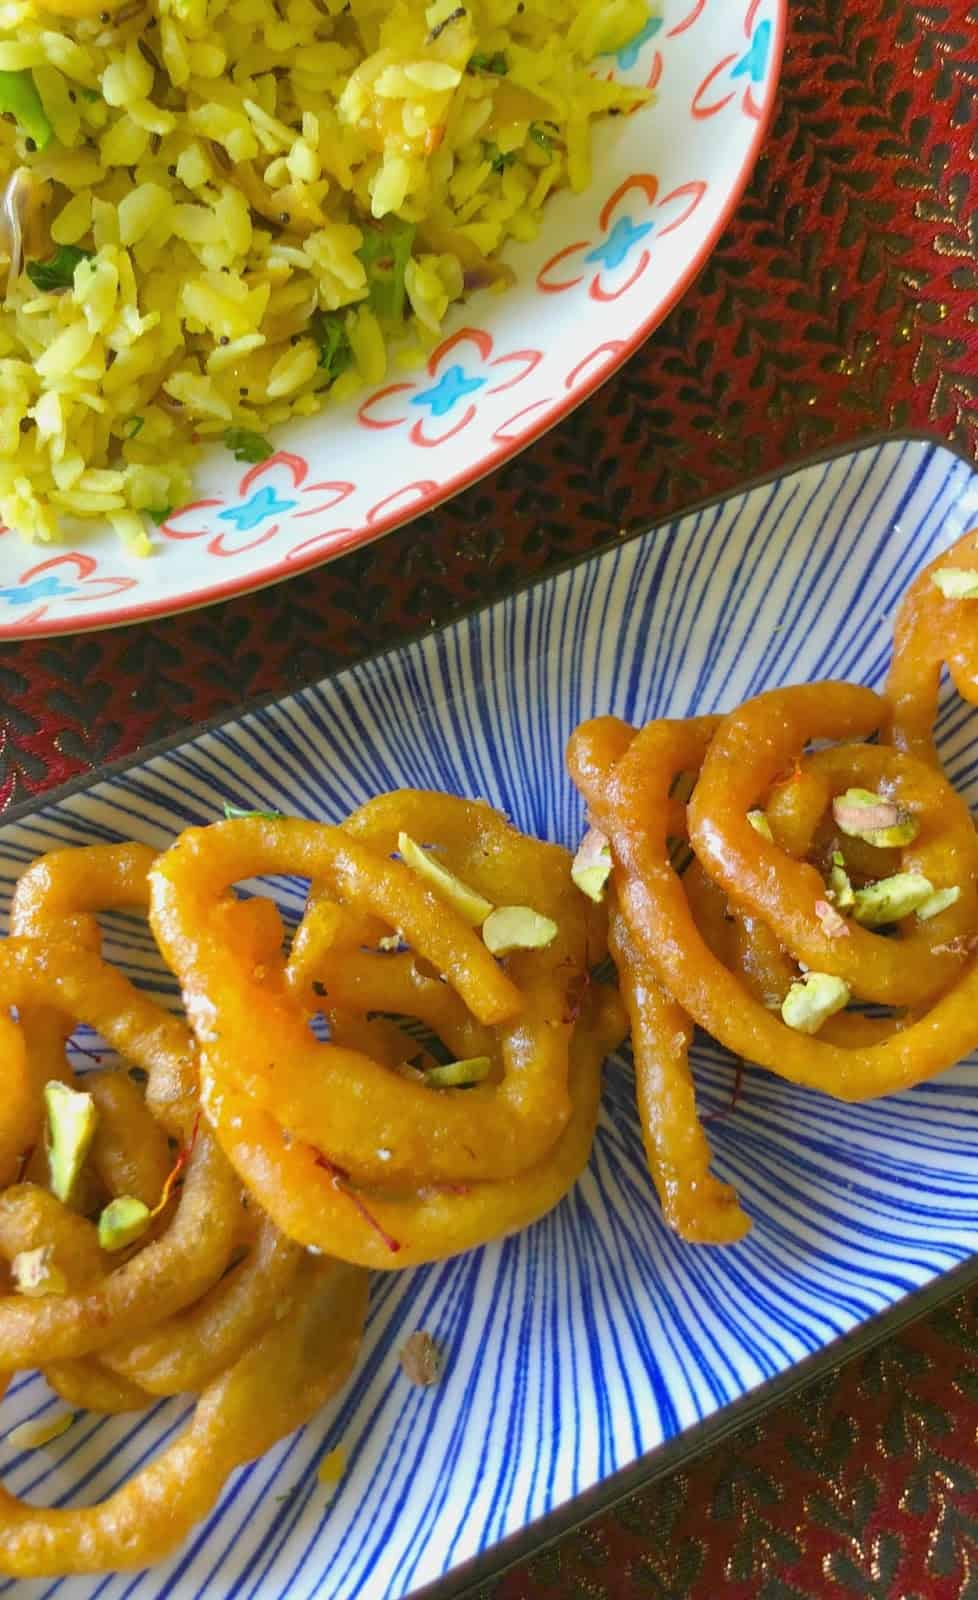 Learn how to make Halwai style Jalebi at home - Instant Jalebi is perfect for DIwali or whenever you need to have a festive sweet!